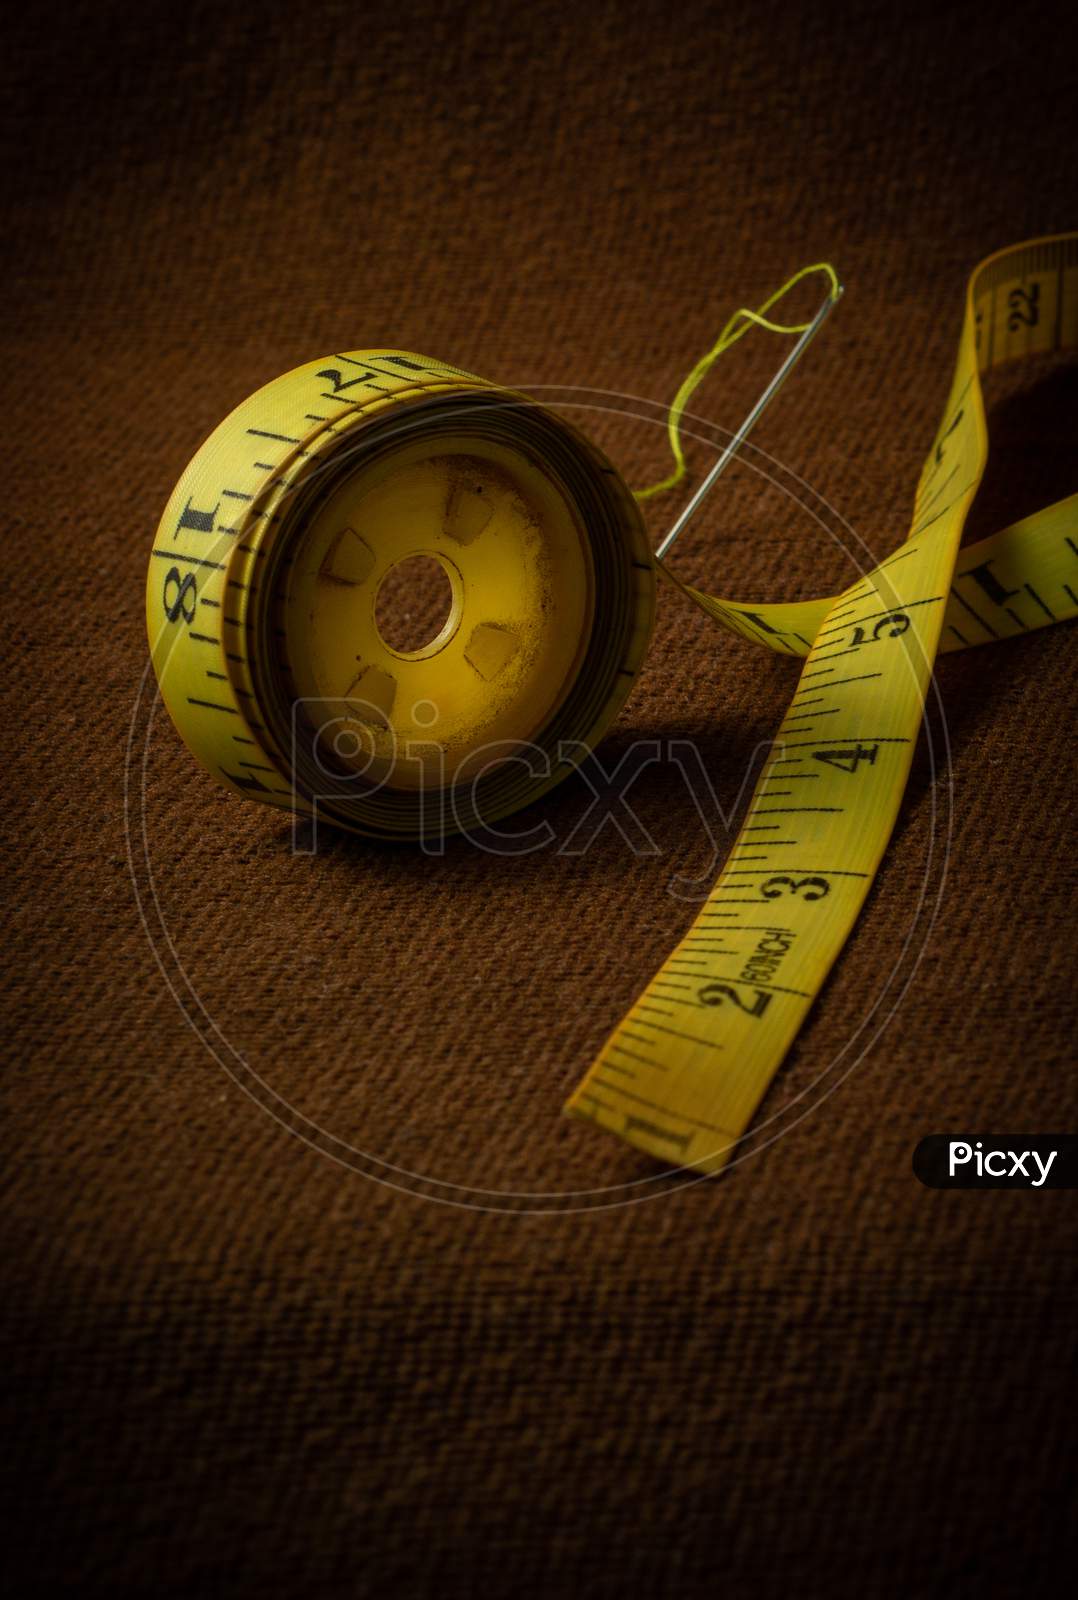 Tailoring Tape On A Brown Background